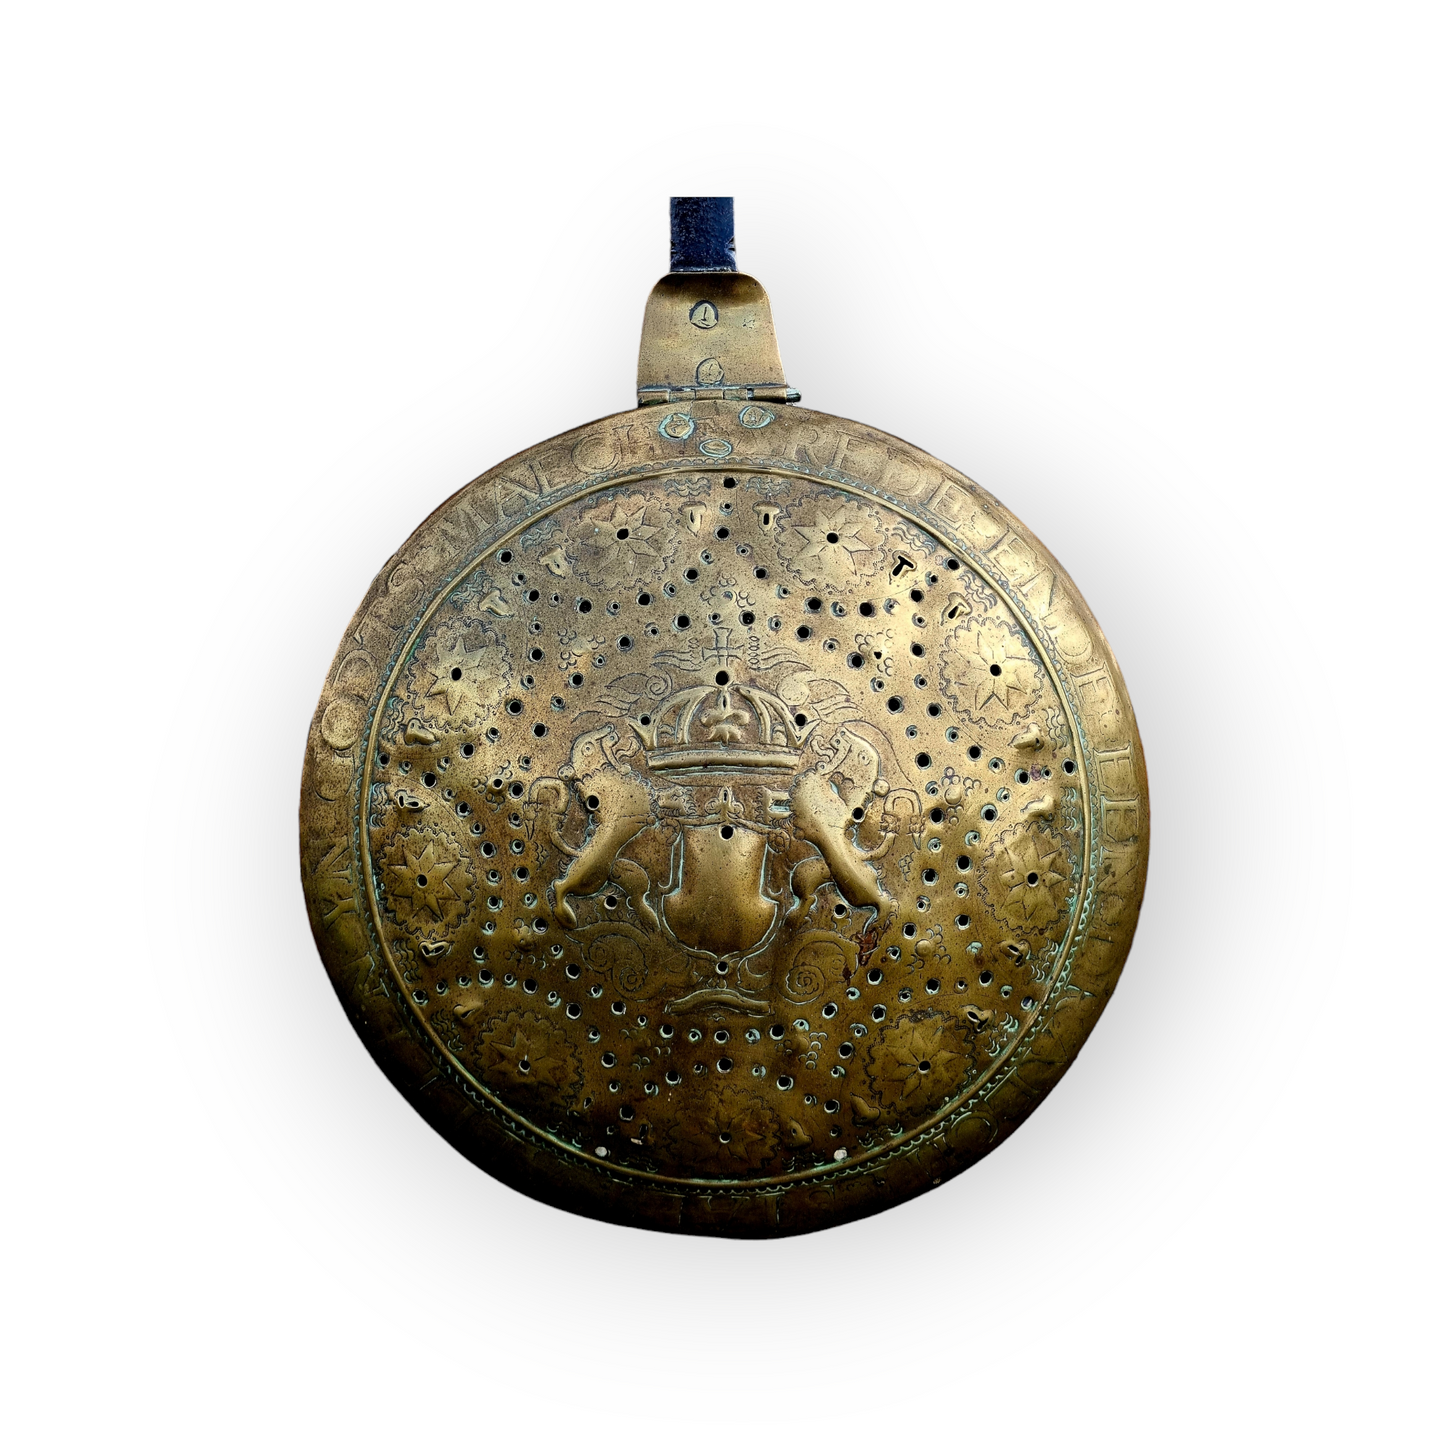 Rare 17th Century Dutch Antique Warming Pan Bearing The Arms of Amsterdam